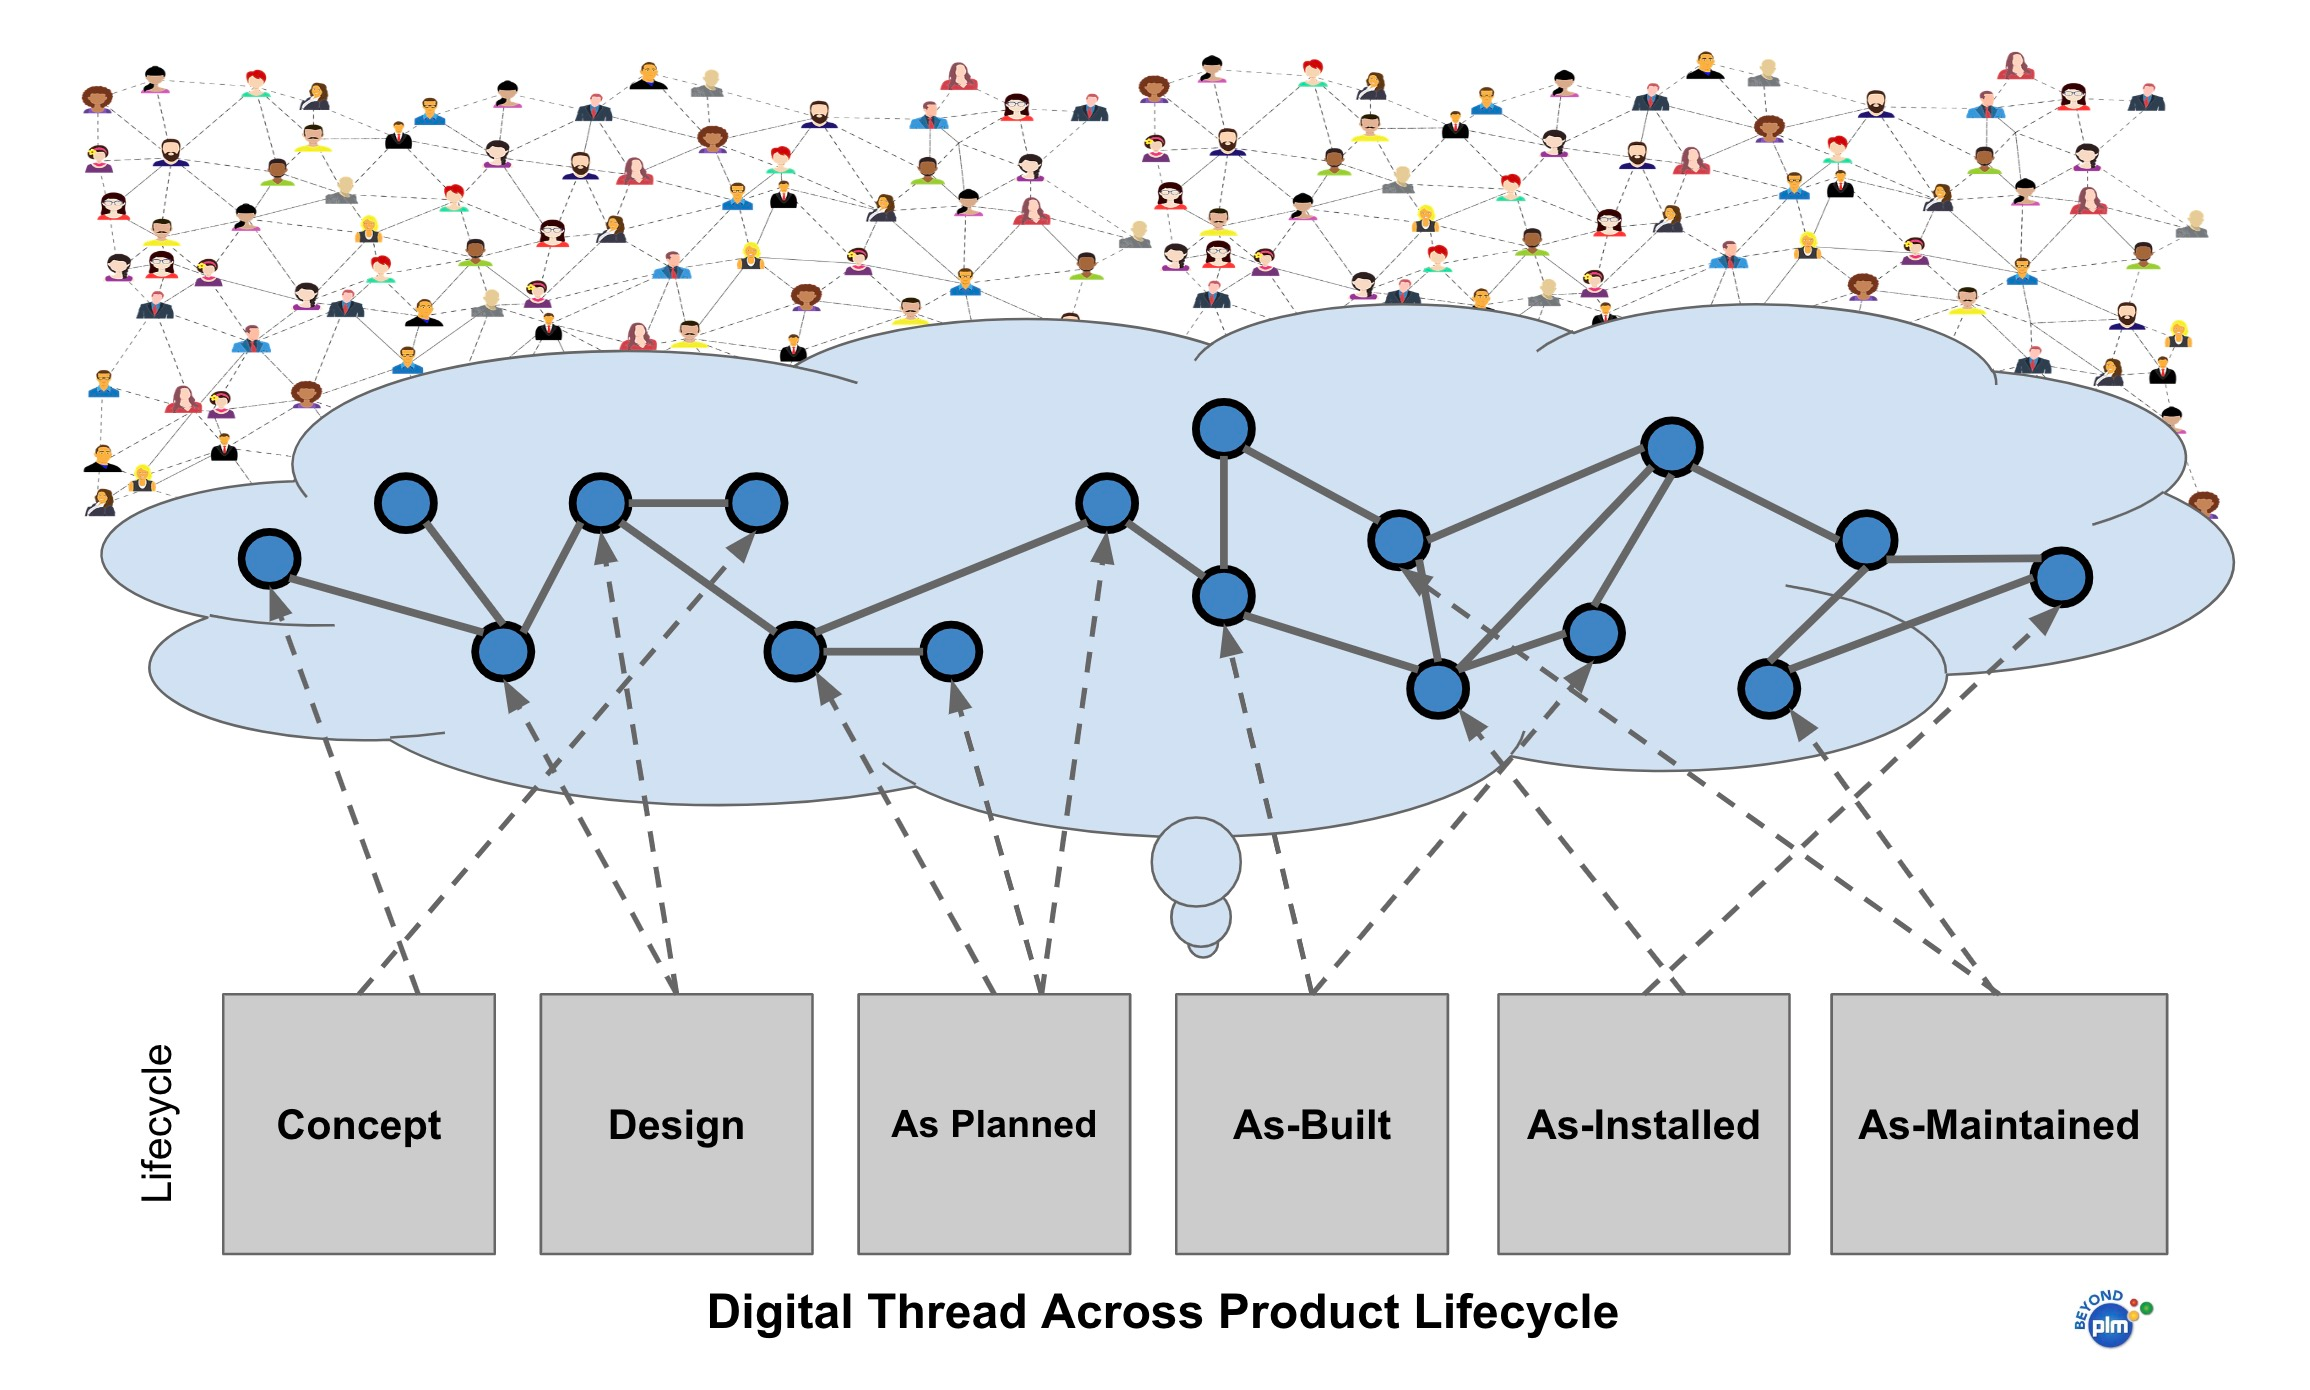 Digital Thread and Product Lifecycle